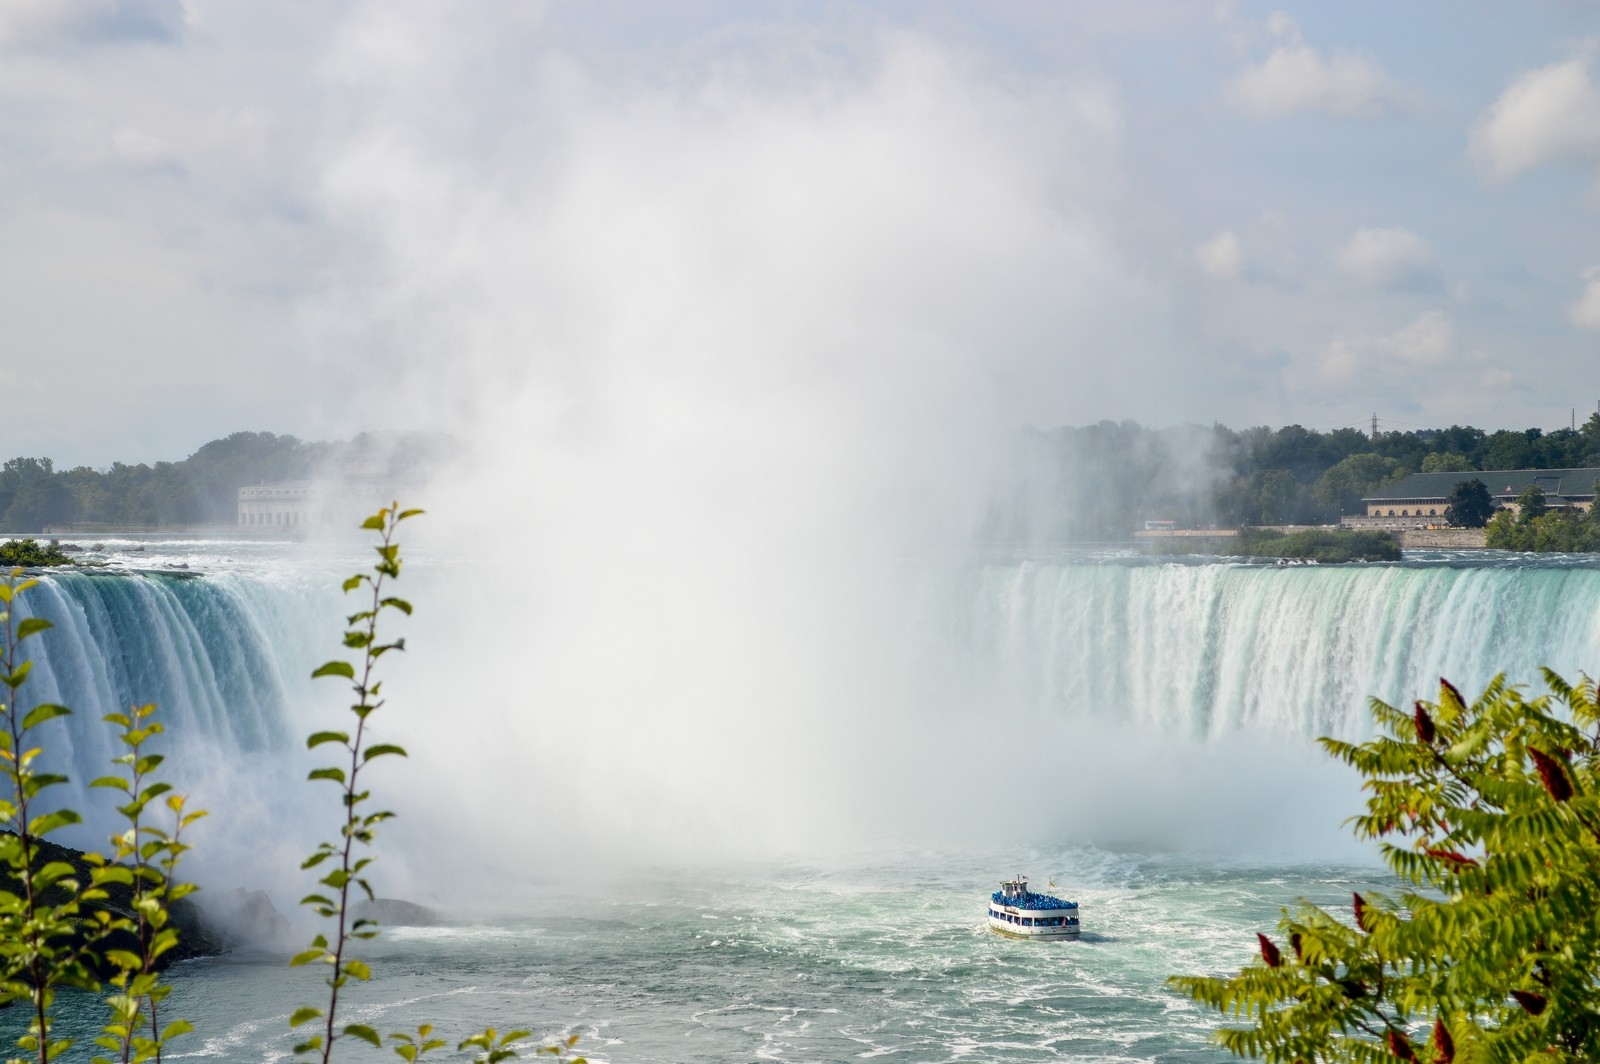 https://res.cloudinary.com/see-sight-tours/image/upload/v1581441855/maid-of-the-mist.jpg